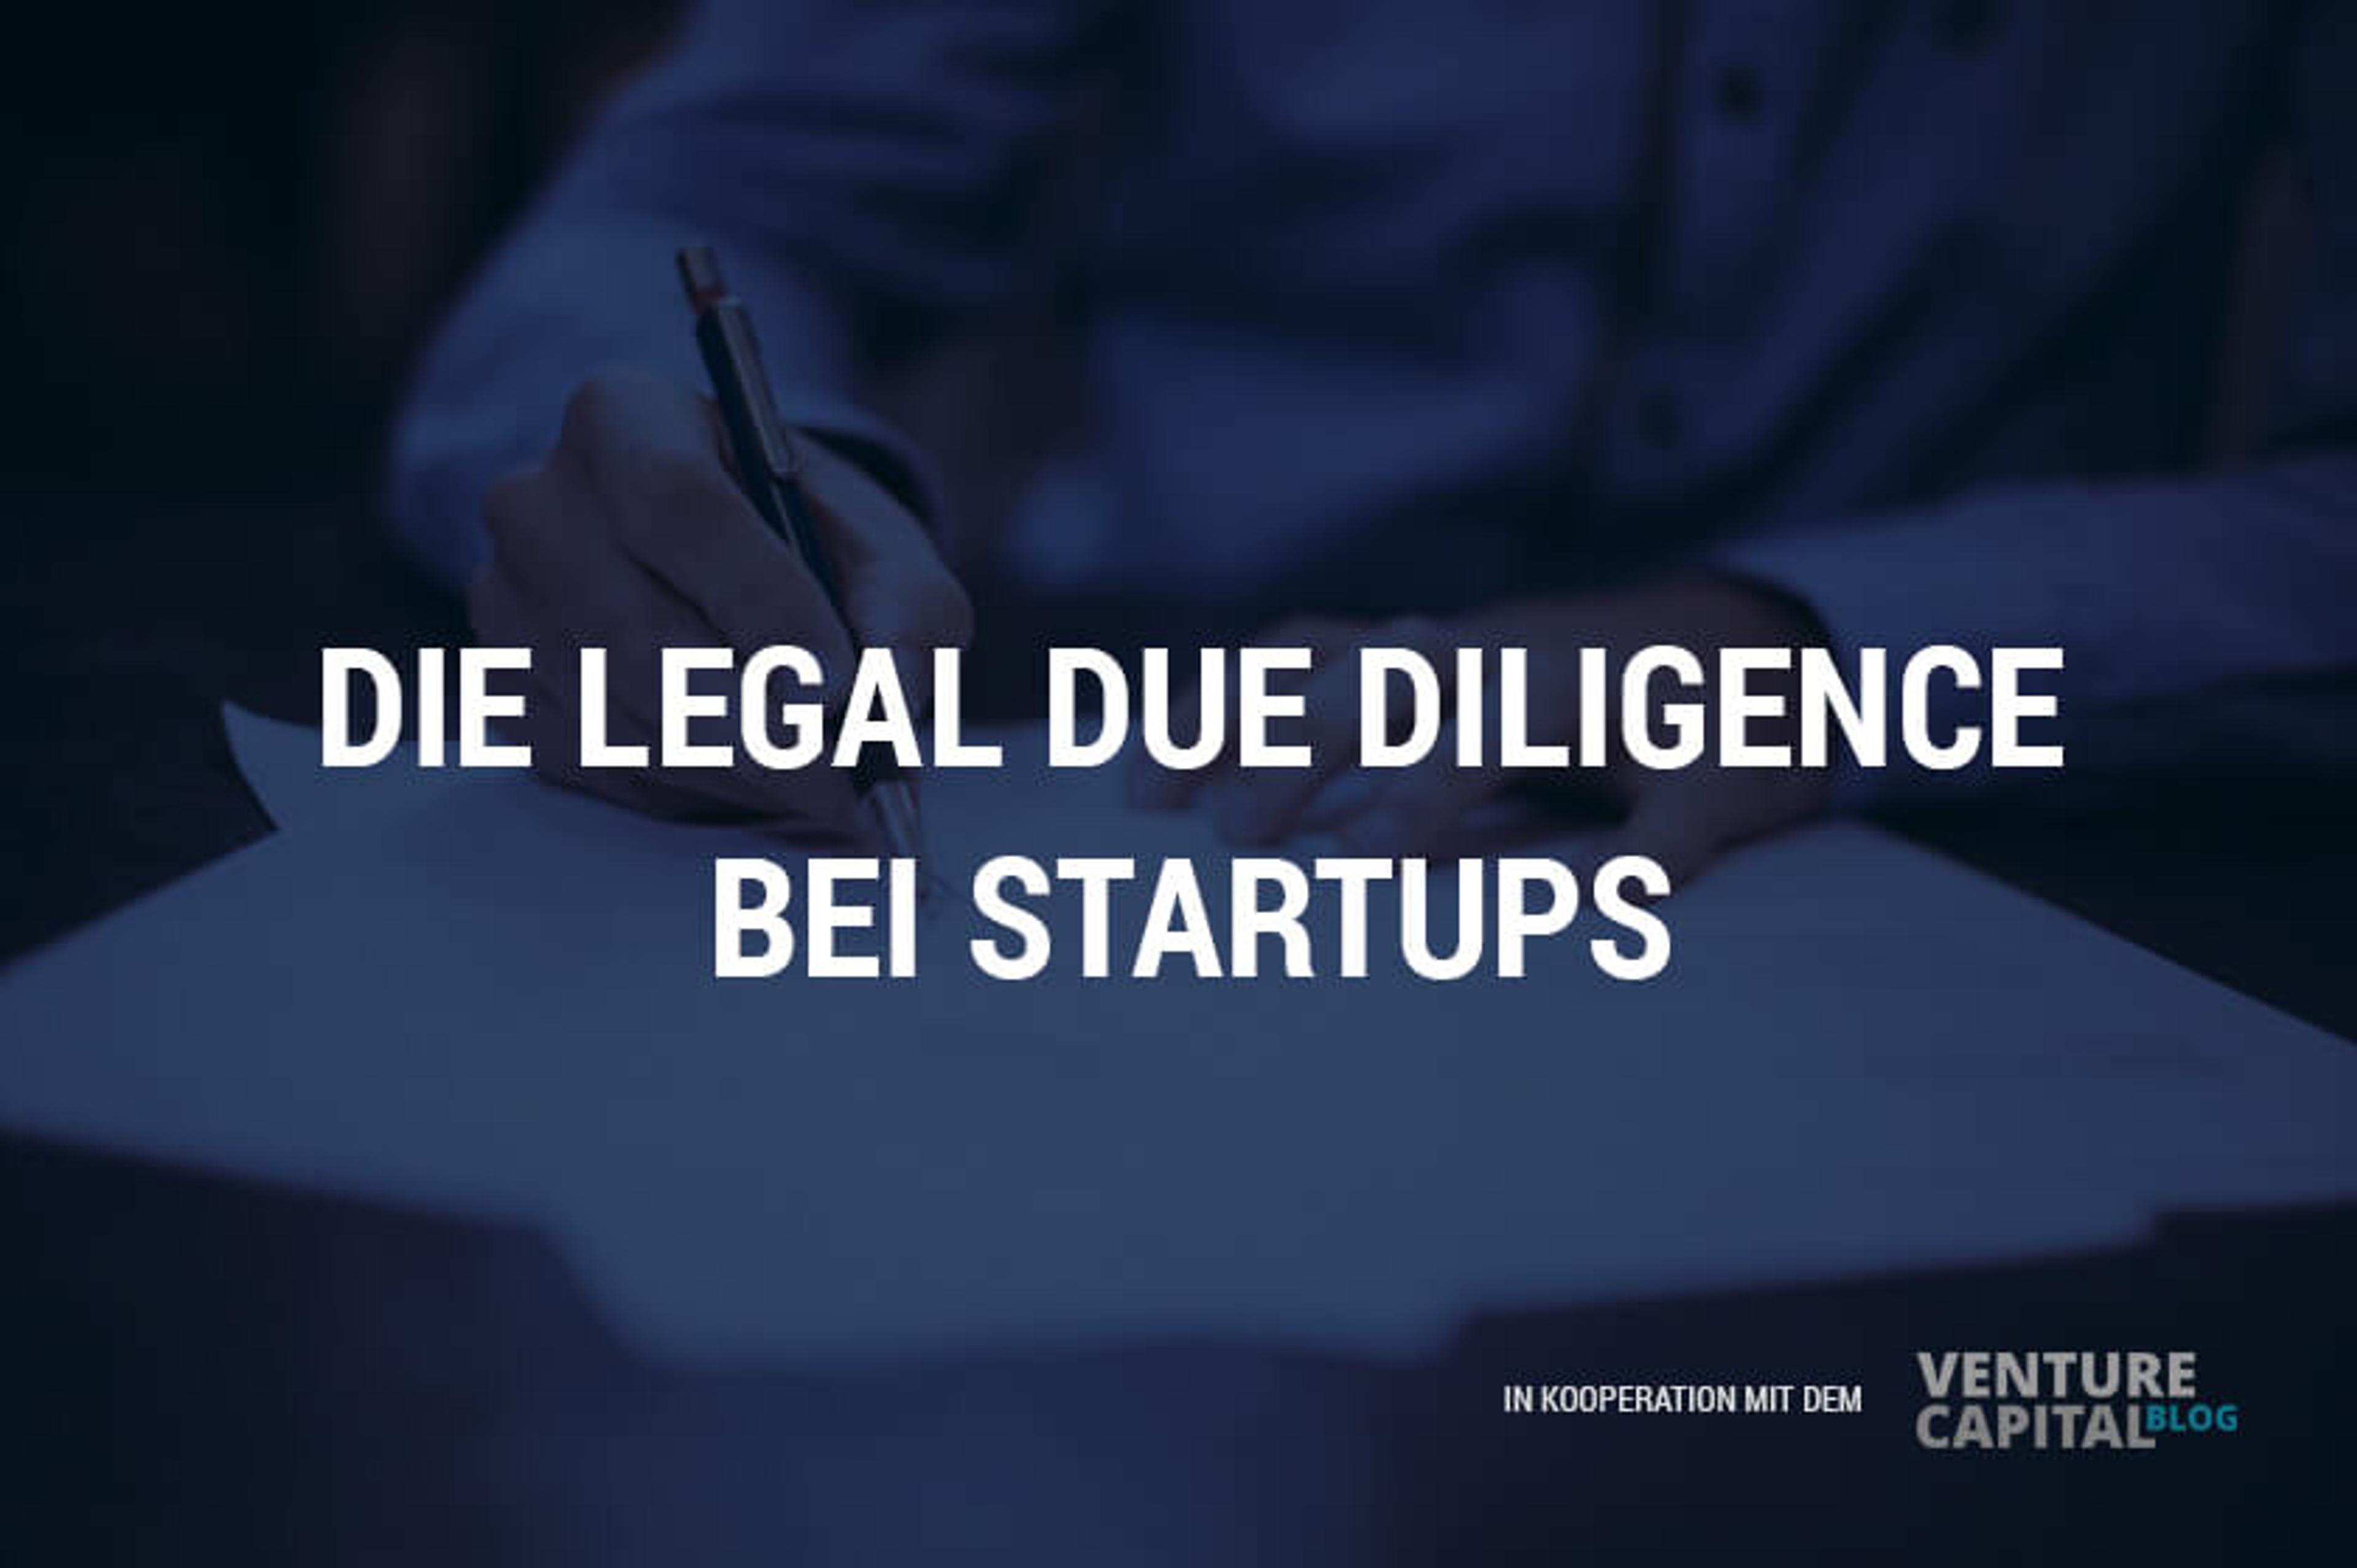 Cover Image for Legal Due Diligence: So werden Startups „Investor-Ready“